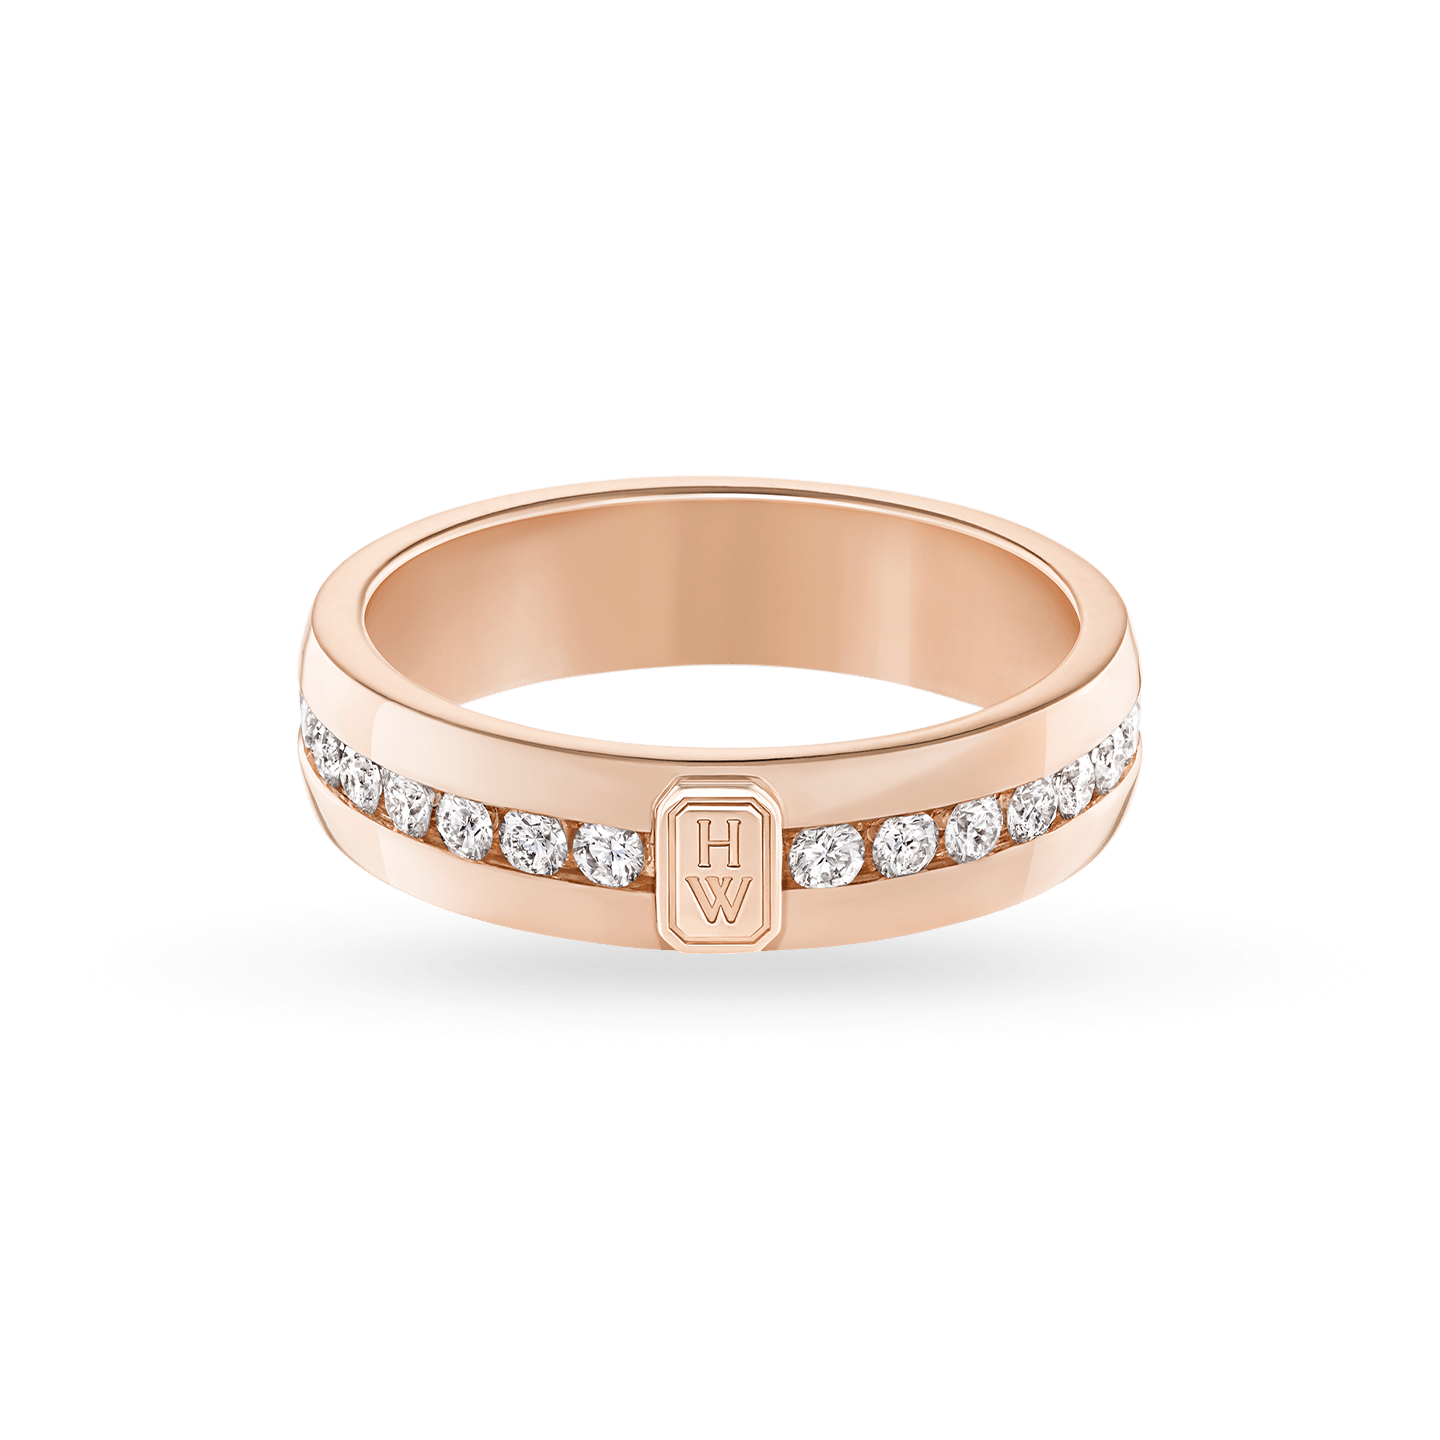 Diamond Wedding Ring PNG - FREE Vector Design - Cdr, Ai, EPS, PNG, SVG